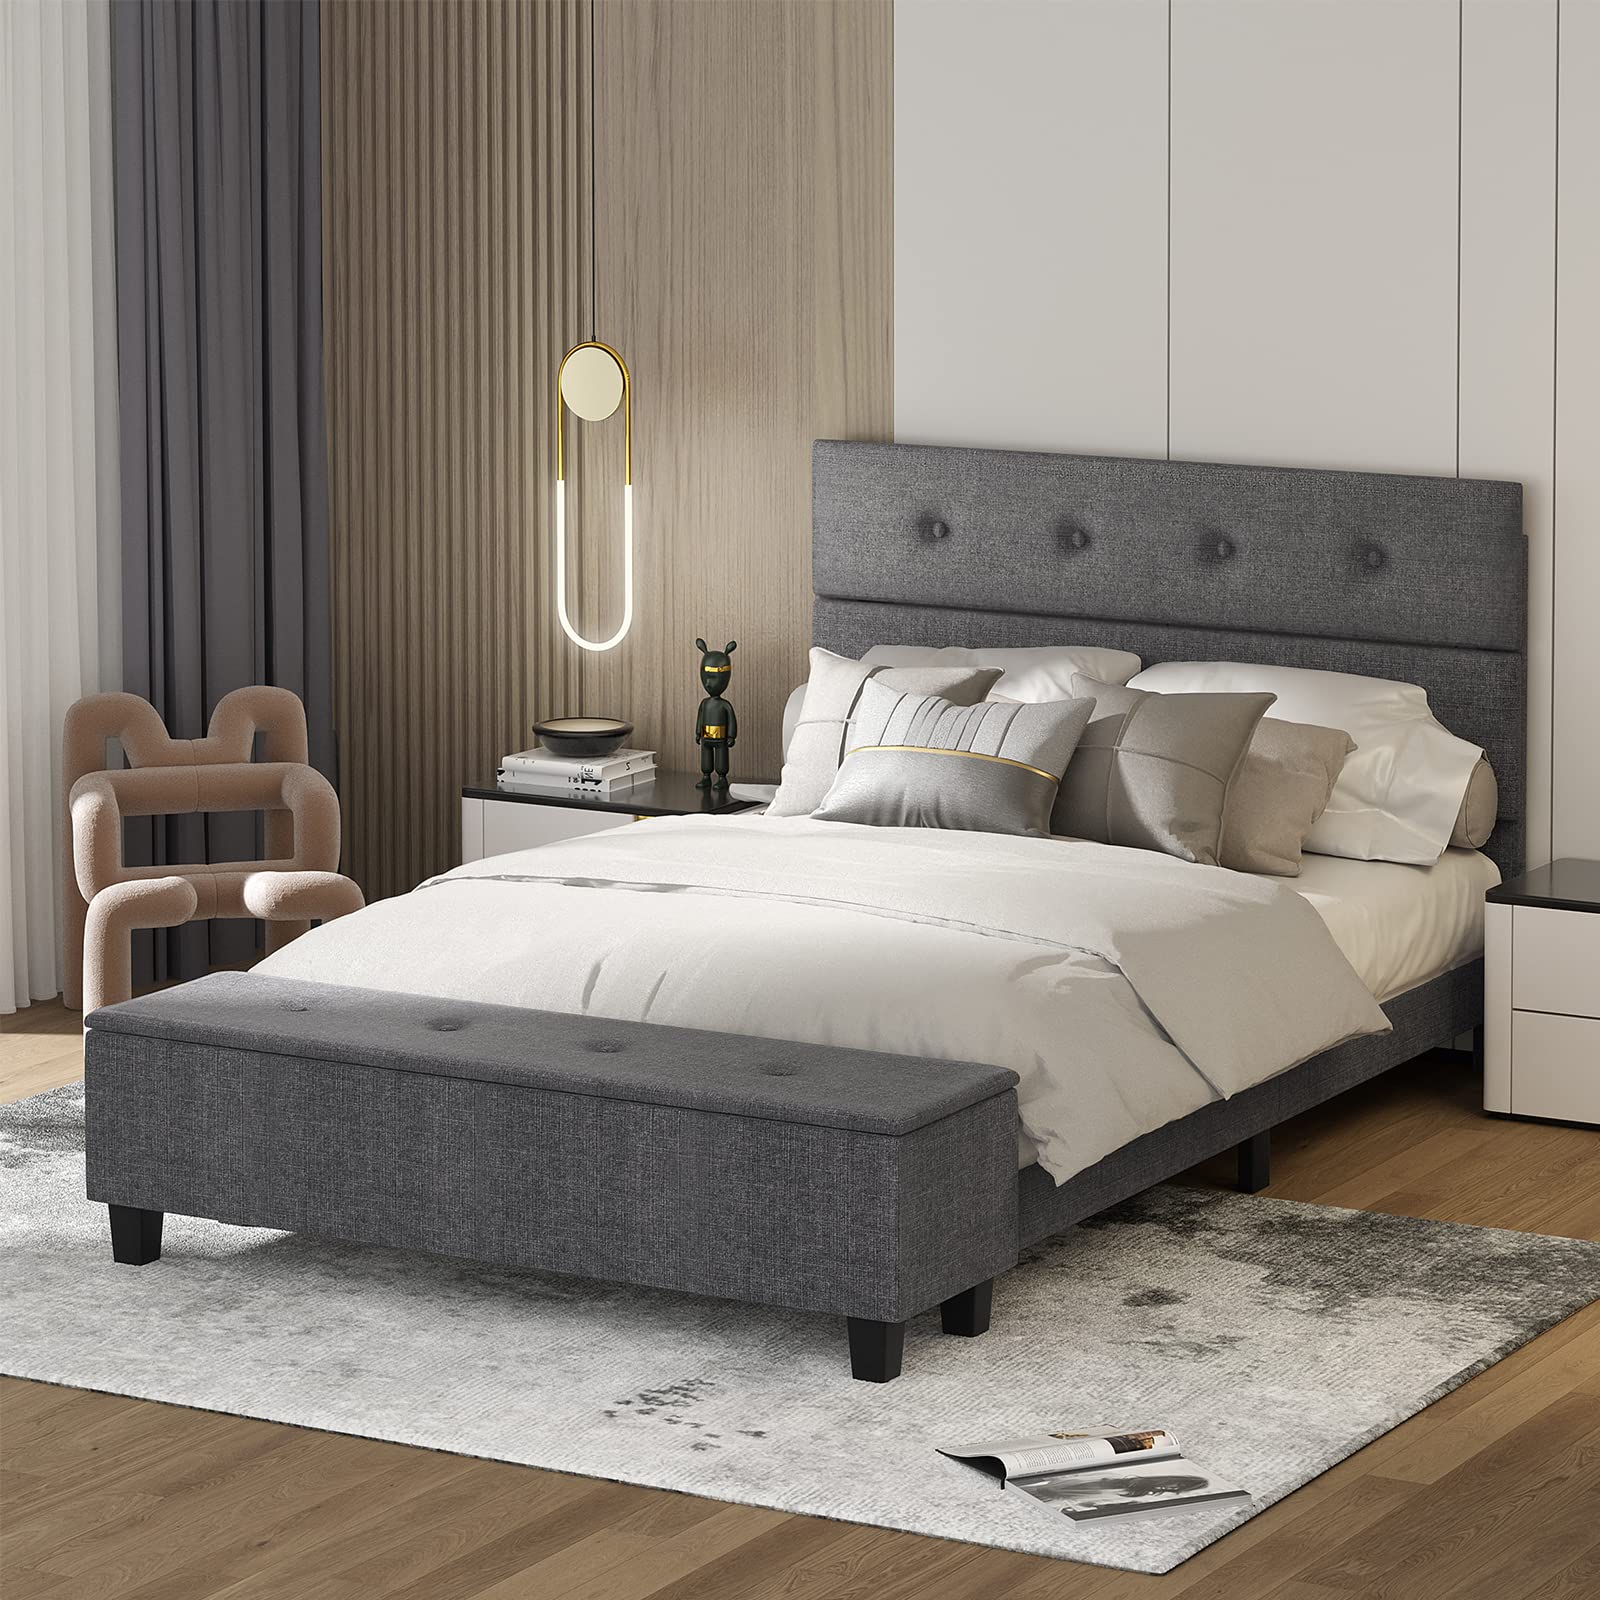 Bed Frame with Ottoman Storage - Giantex